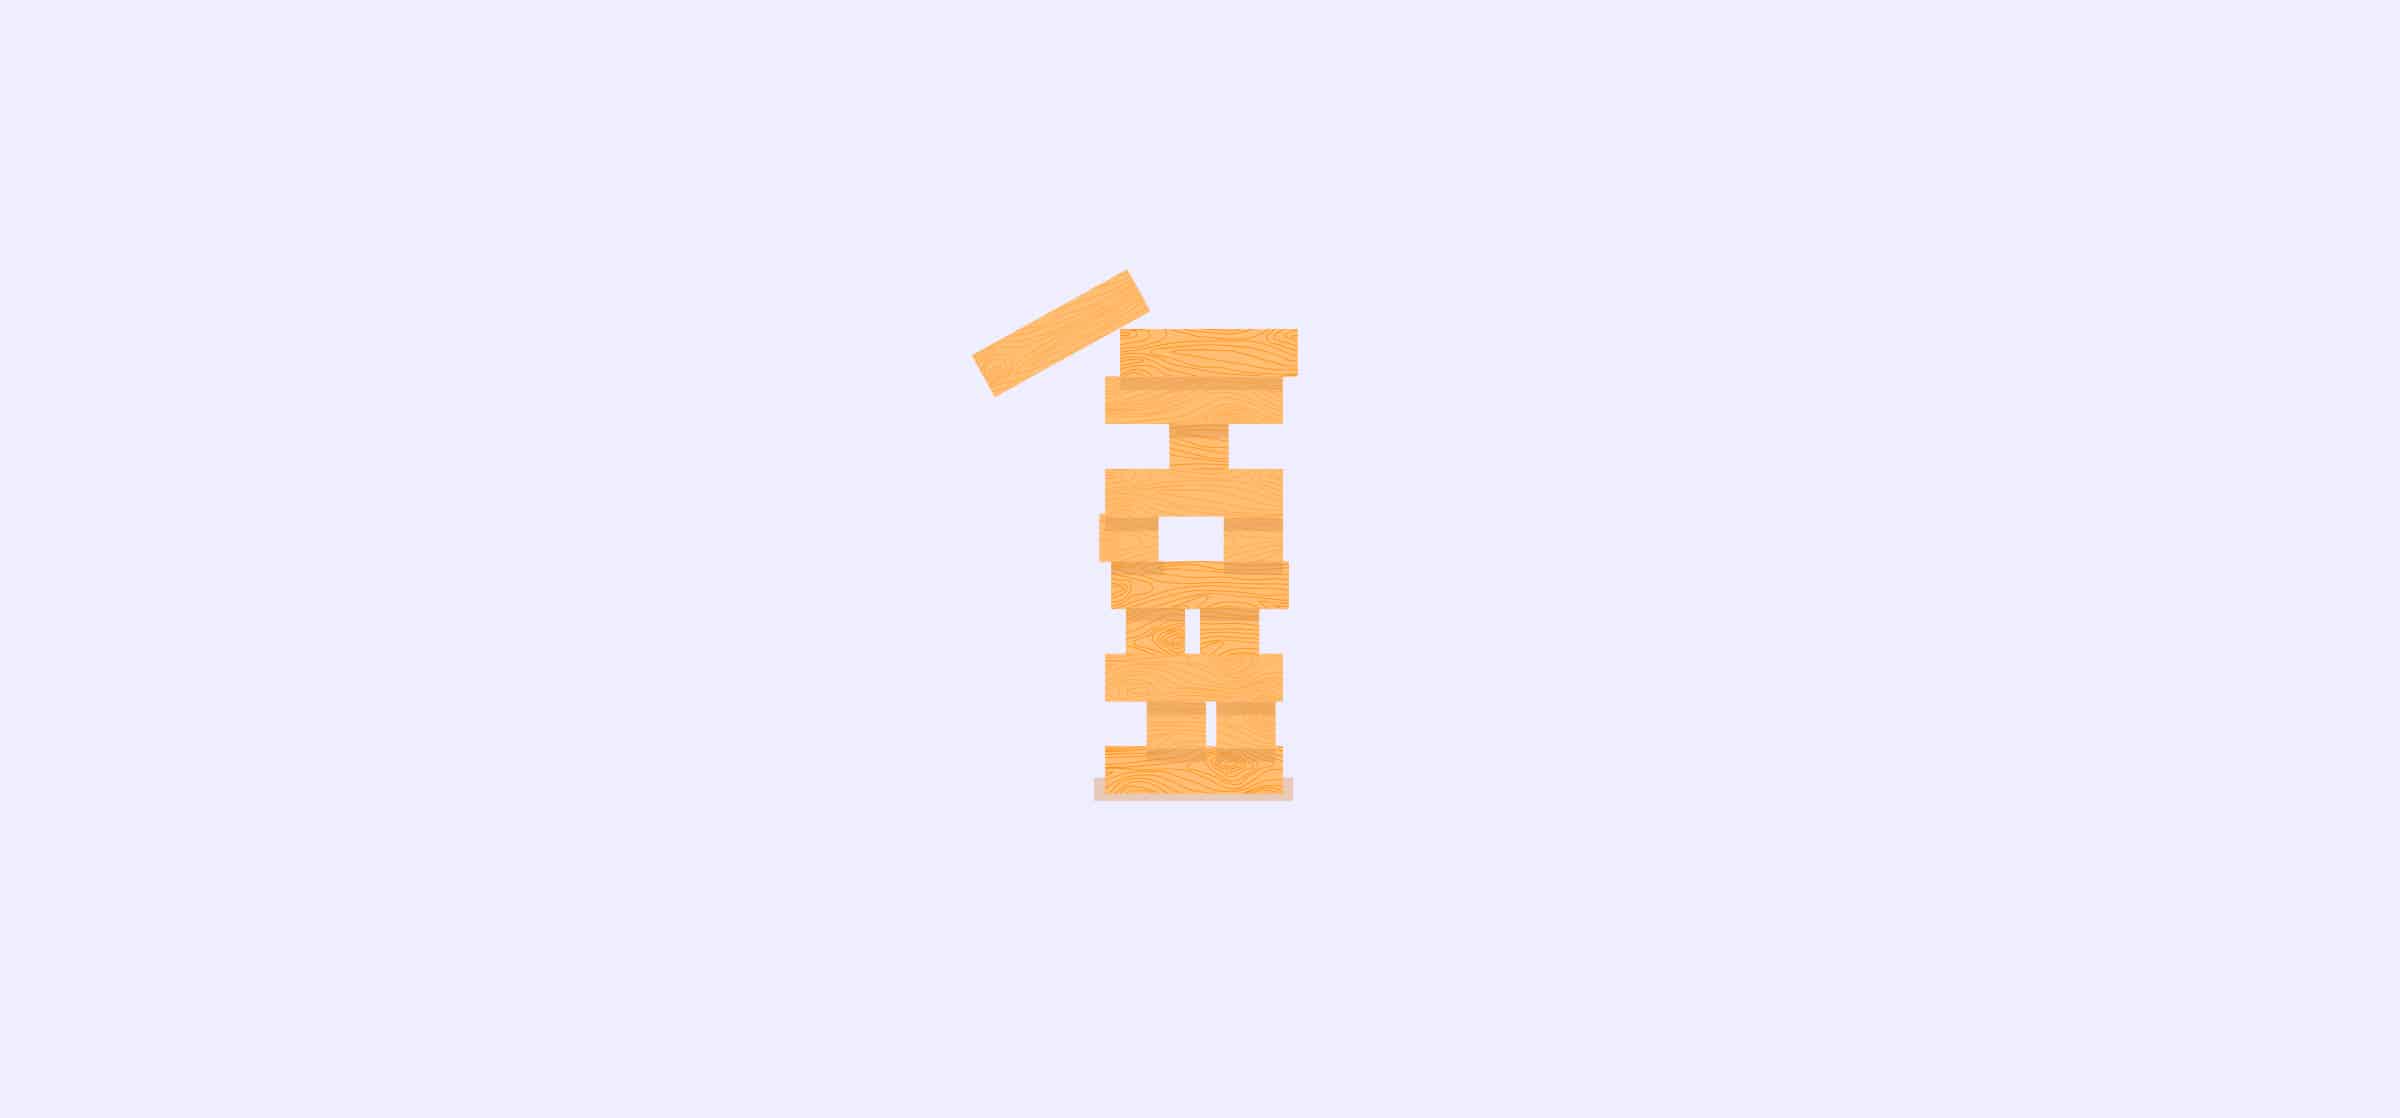 A jenga tower with a block falling off, representing risk reports.